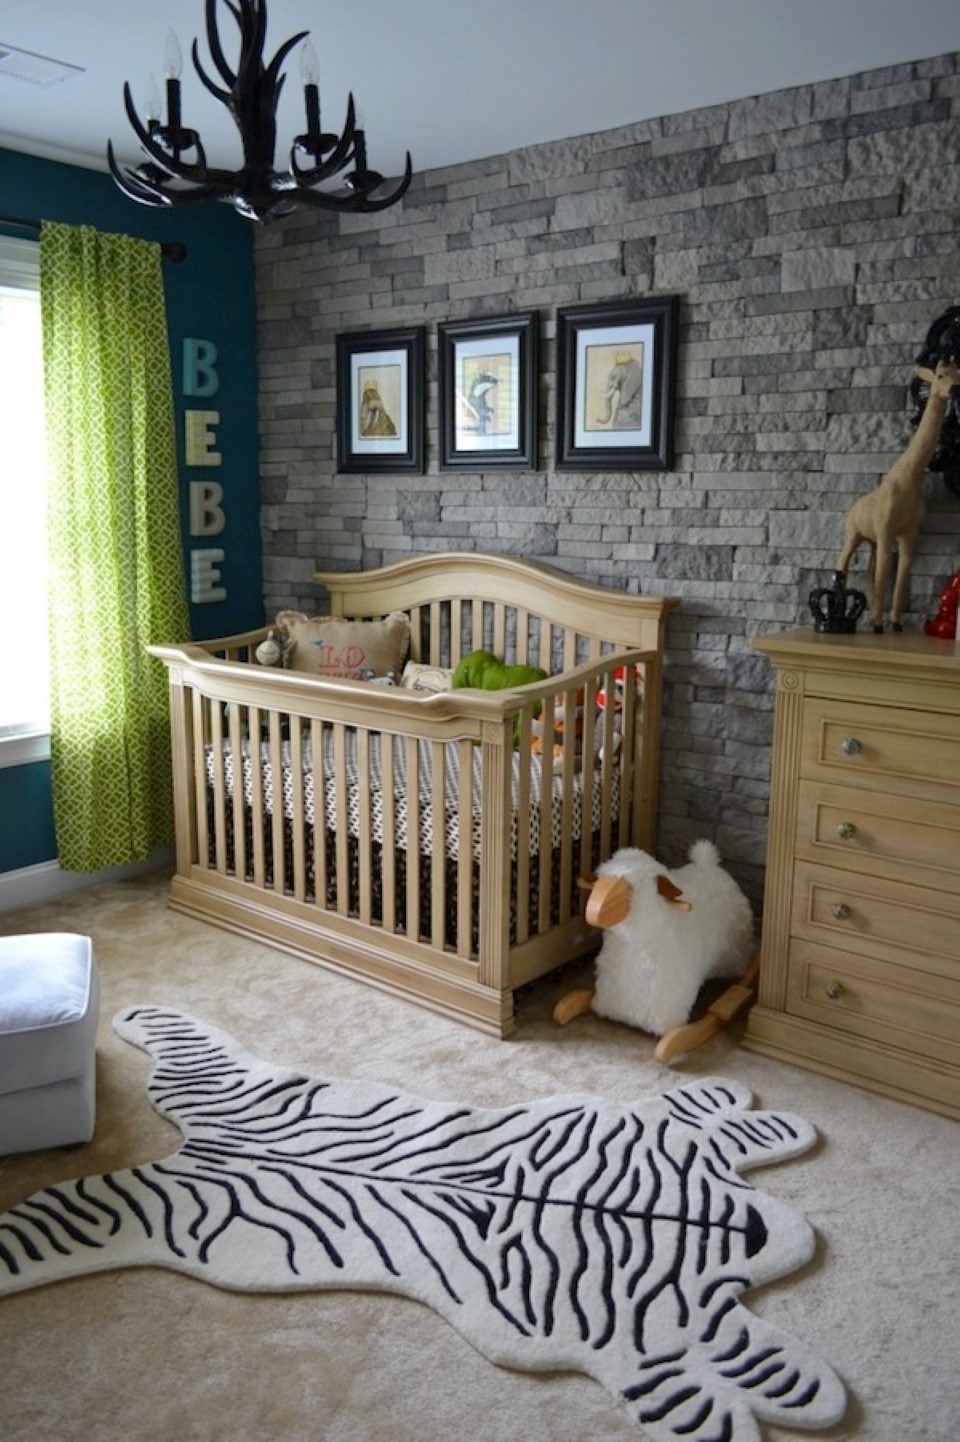 Chandelier Also Wall Antler Chandelier Also Stone Accent Wall Idea Feat Comfortable Baby Nursery Furniture And Awesome Zebra Pattern Rug Kids Room Modern And Minimalist Baby Nursery Furniture Ideas